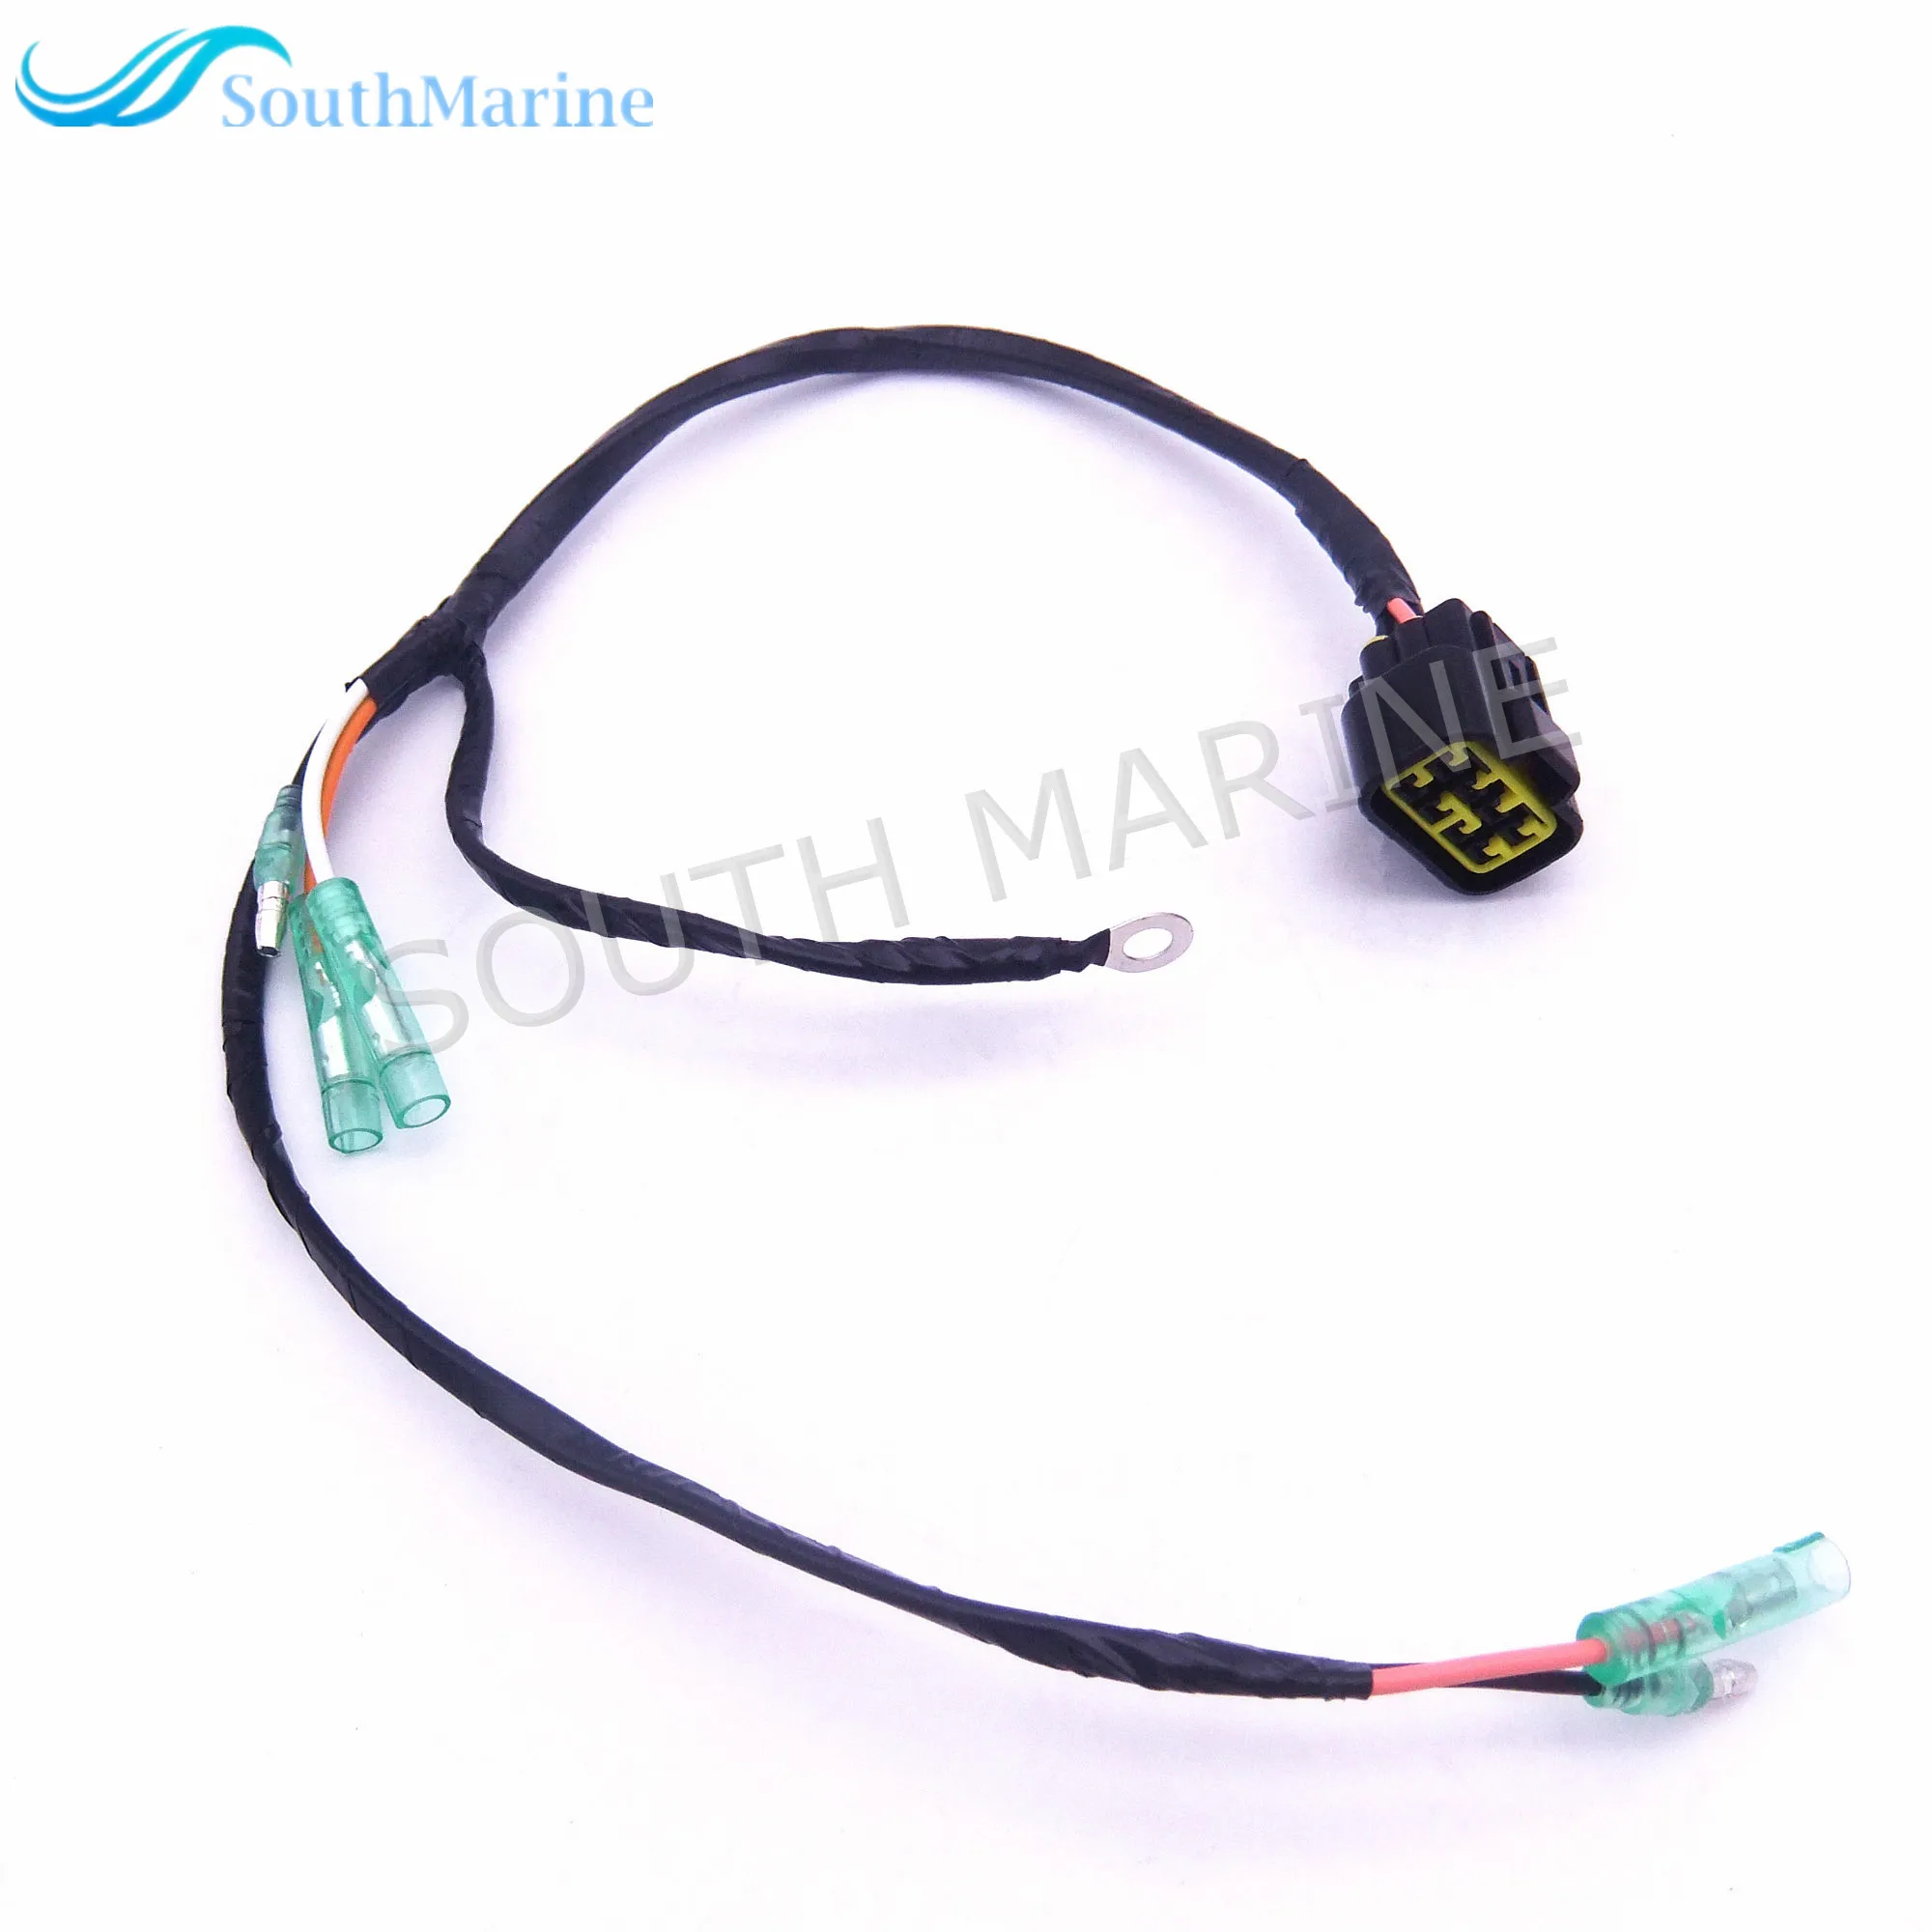 Boat Motor 6F5-82590-20 Wire harness of C.D.I CDI Unit Assy for Yamaha Outboard Engine E40G E40J